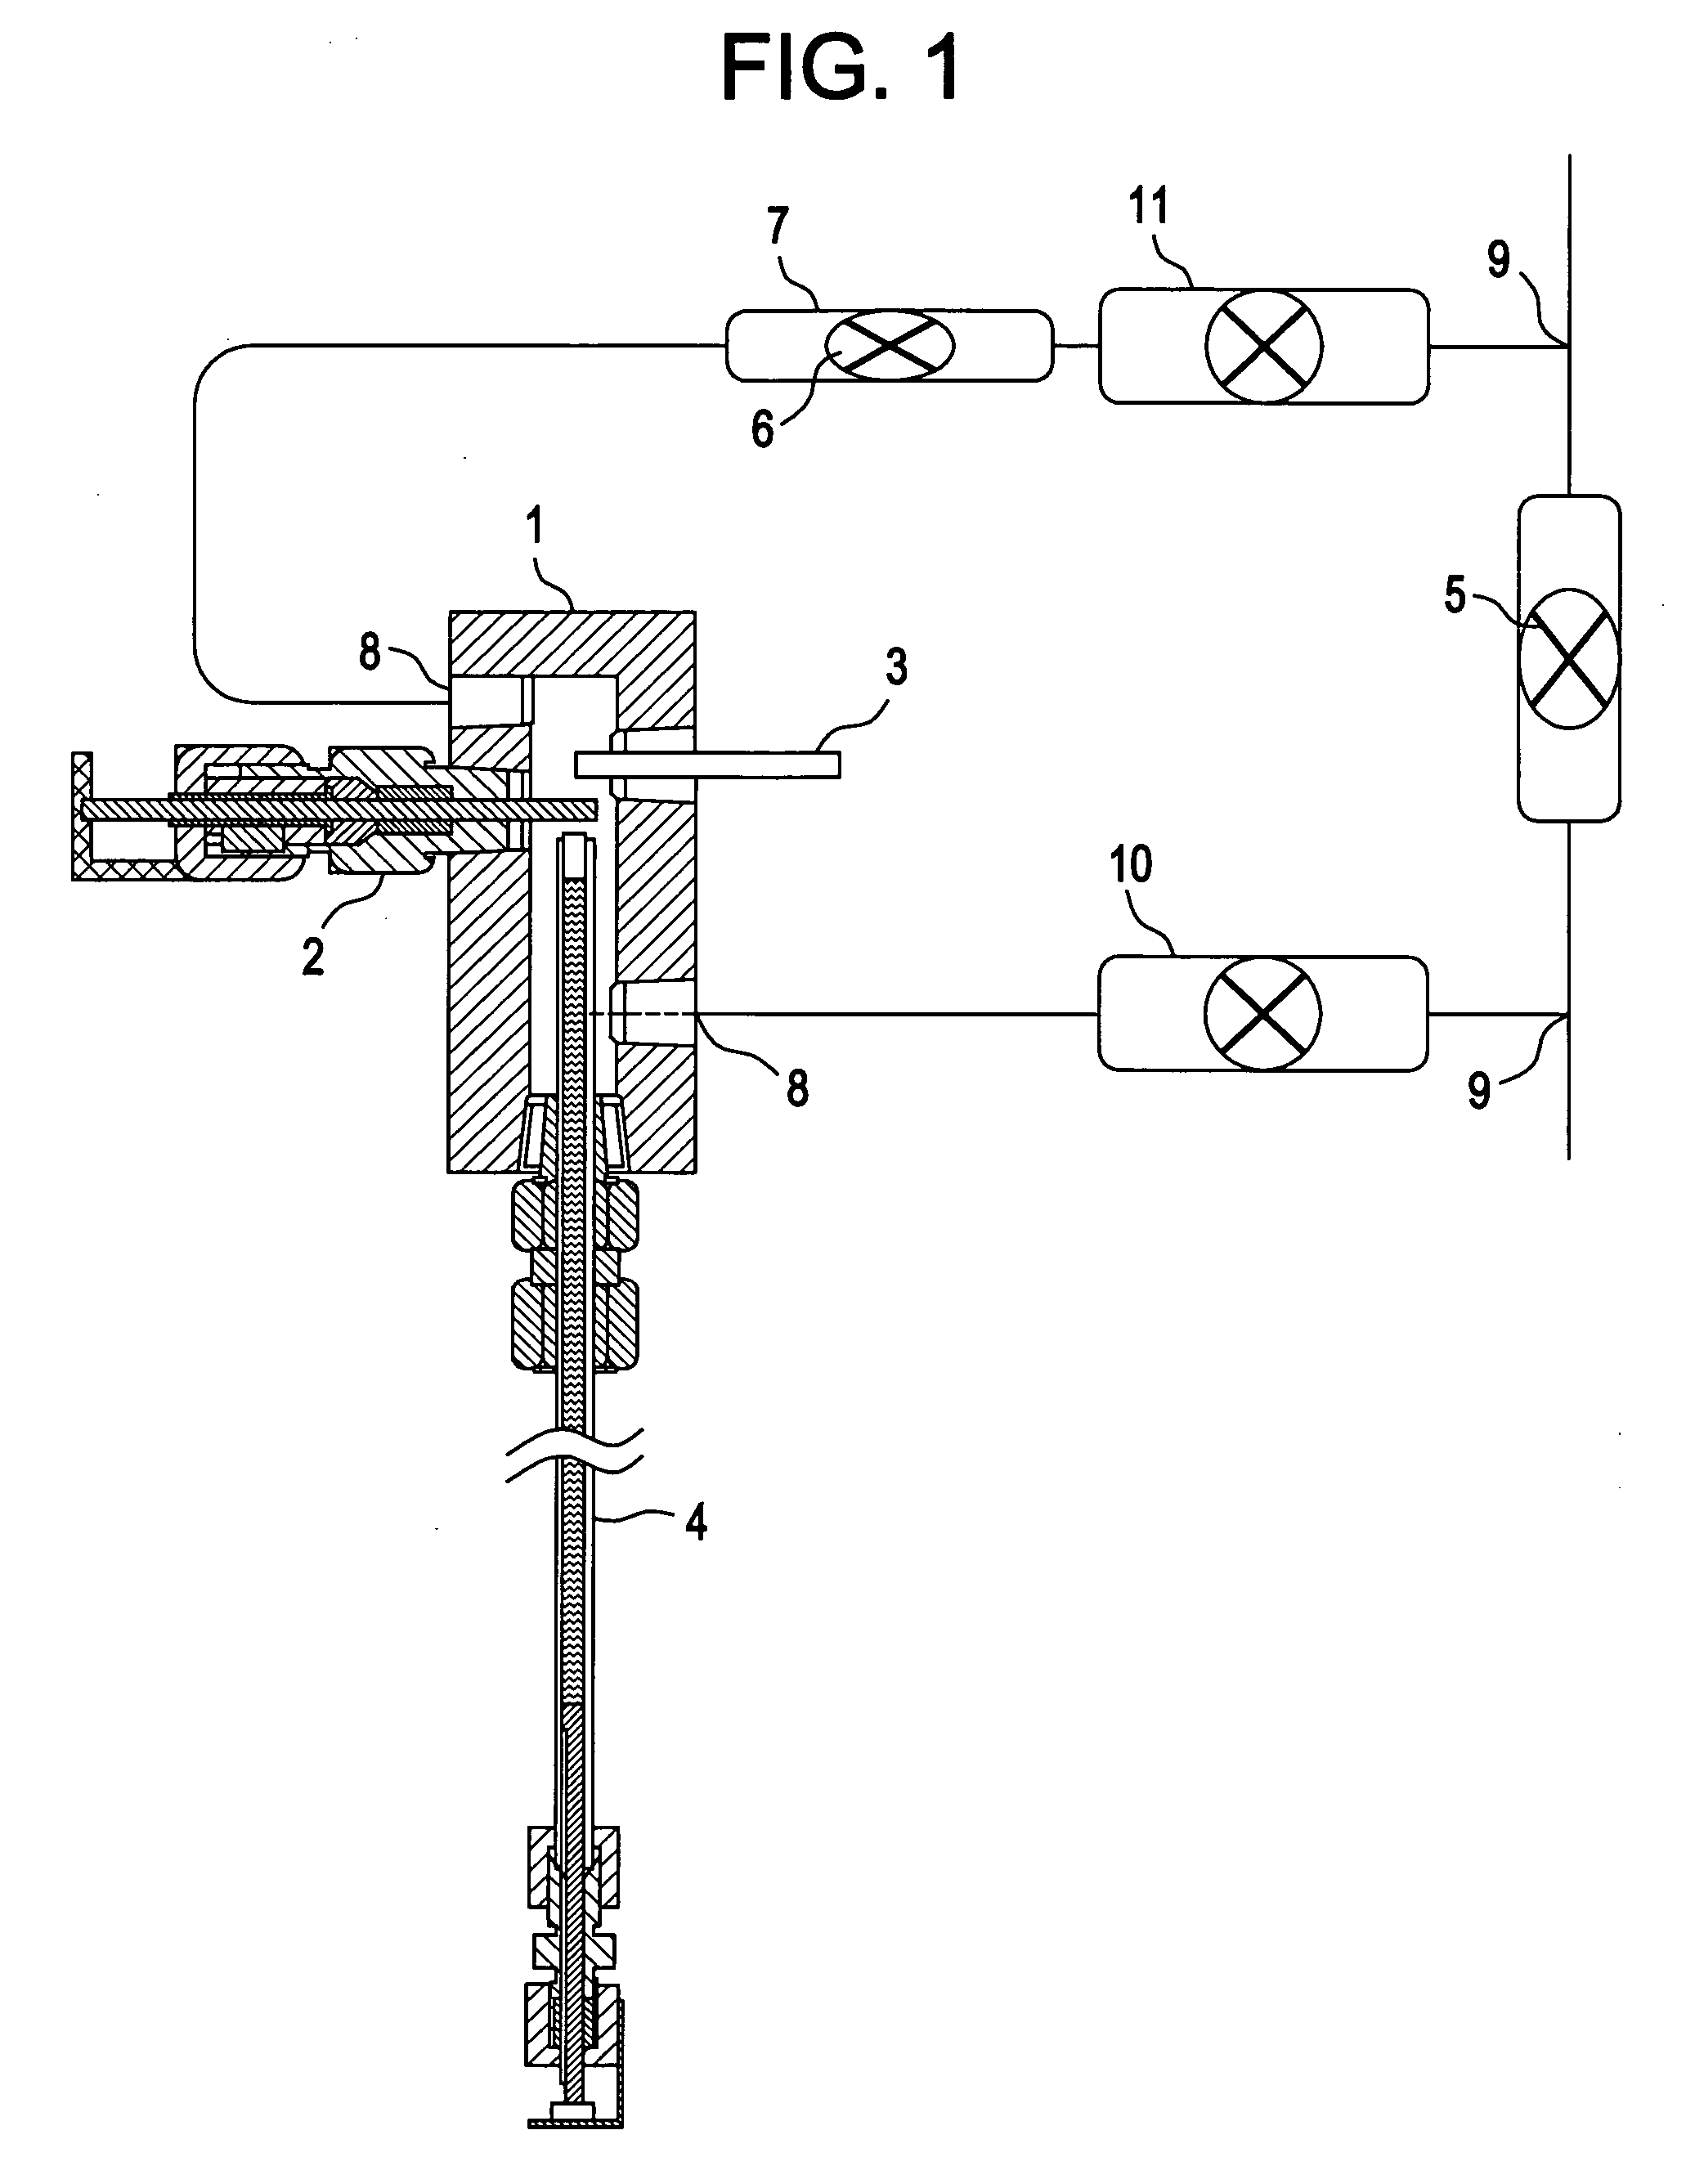 Method of inhibiting corrosion in hot water systems